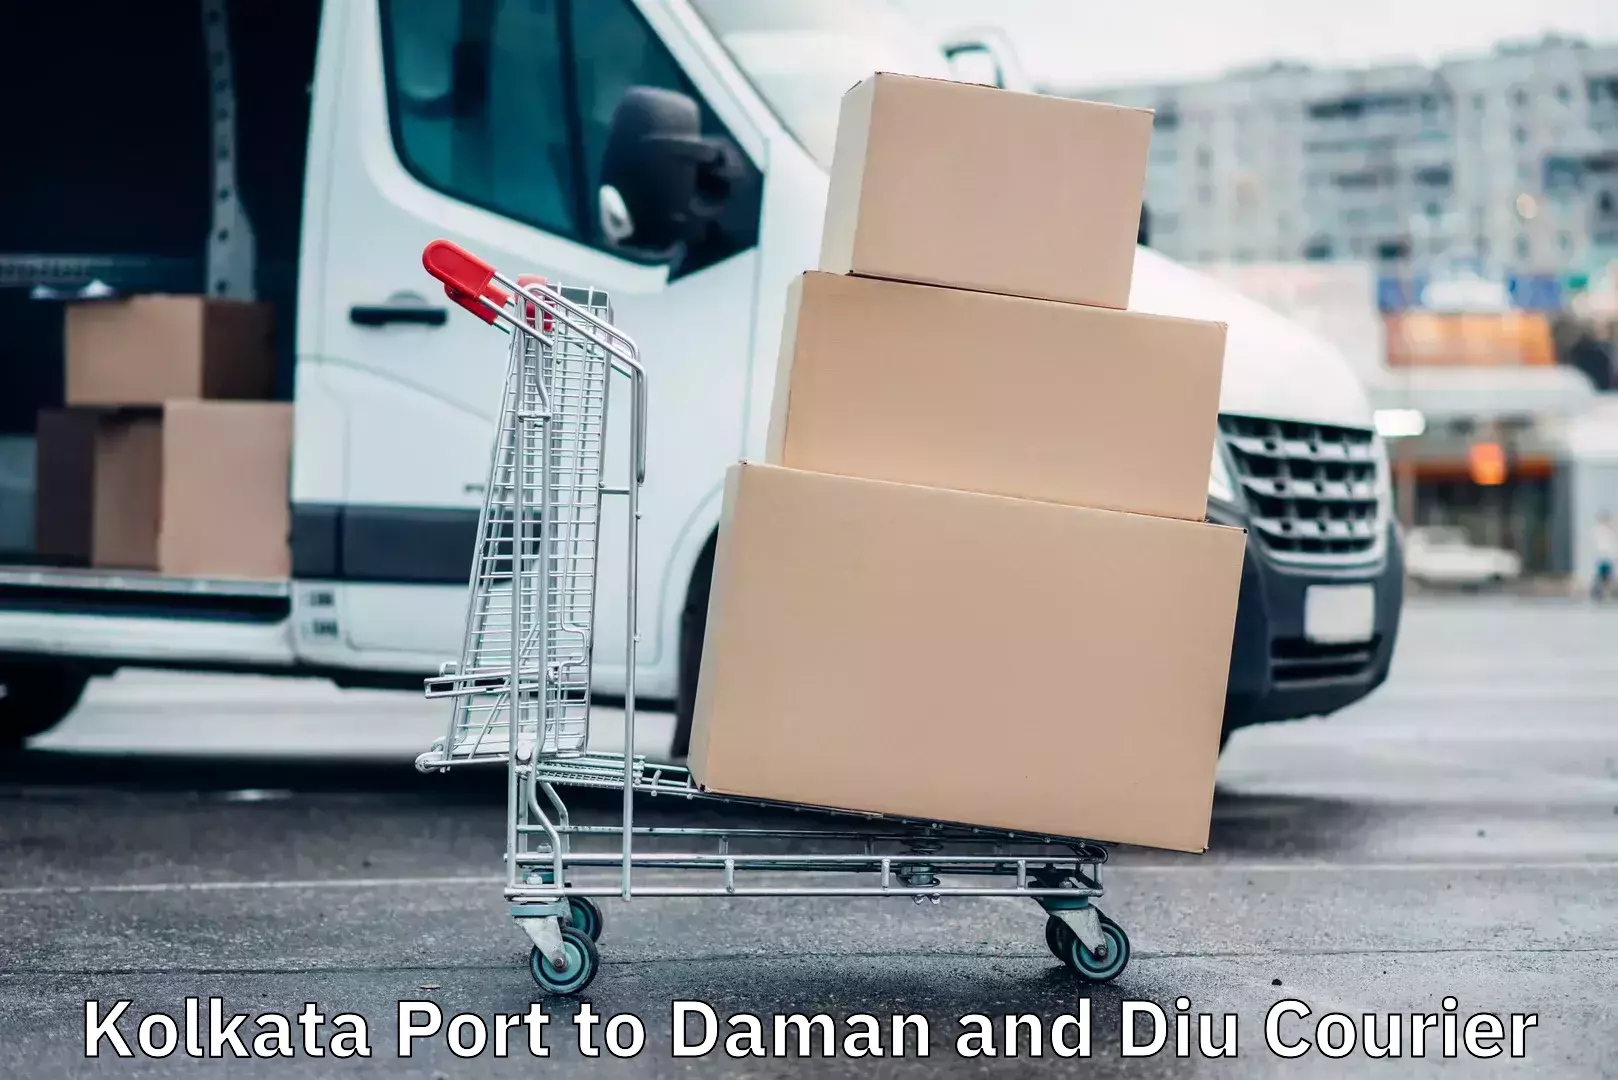 On-time delivery services Kolkata Port to Daman and Diu